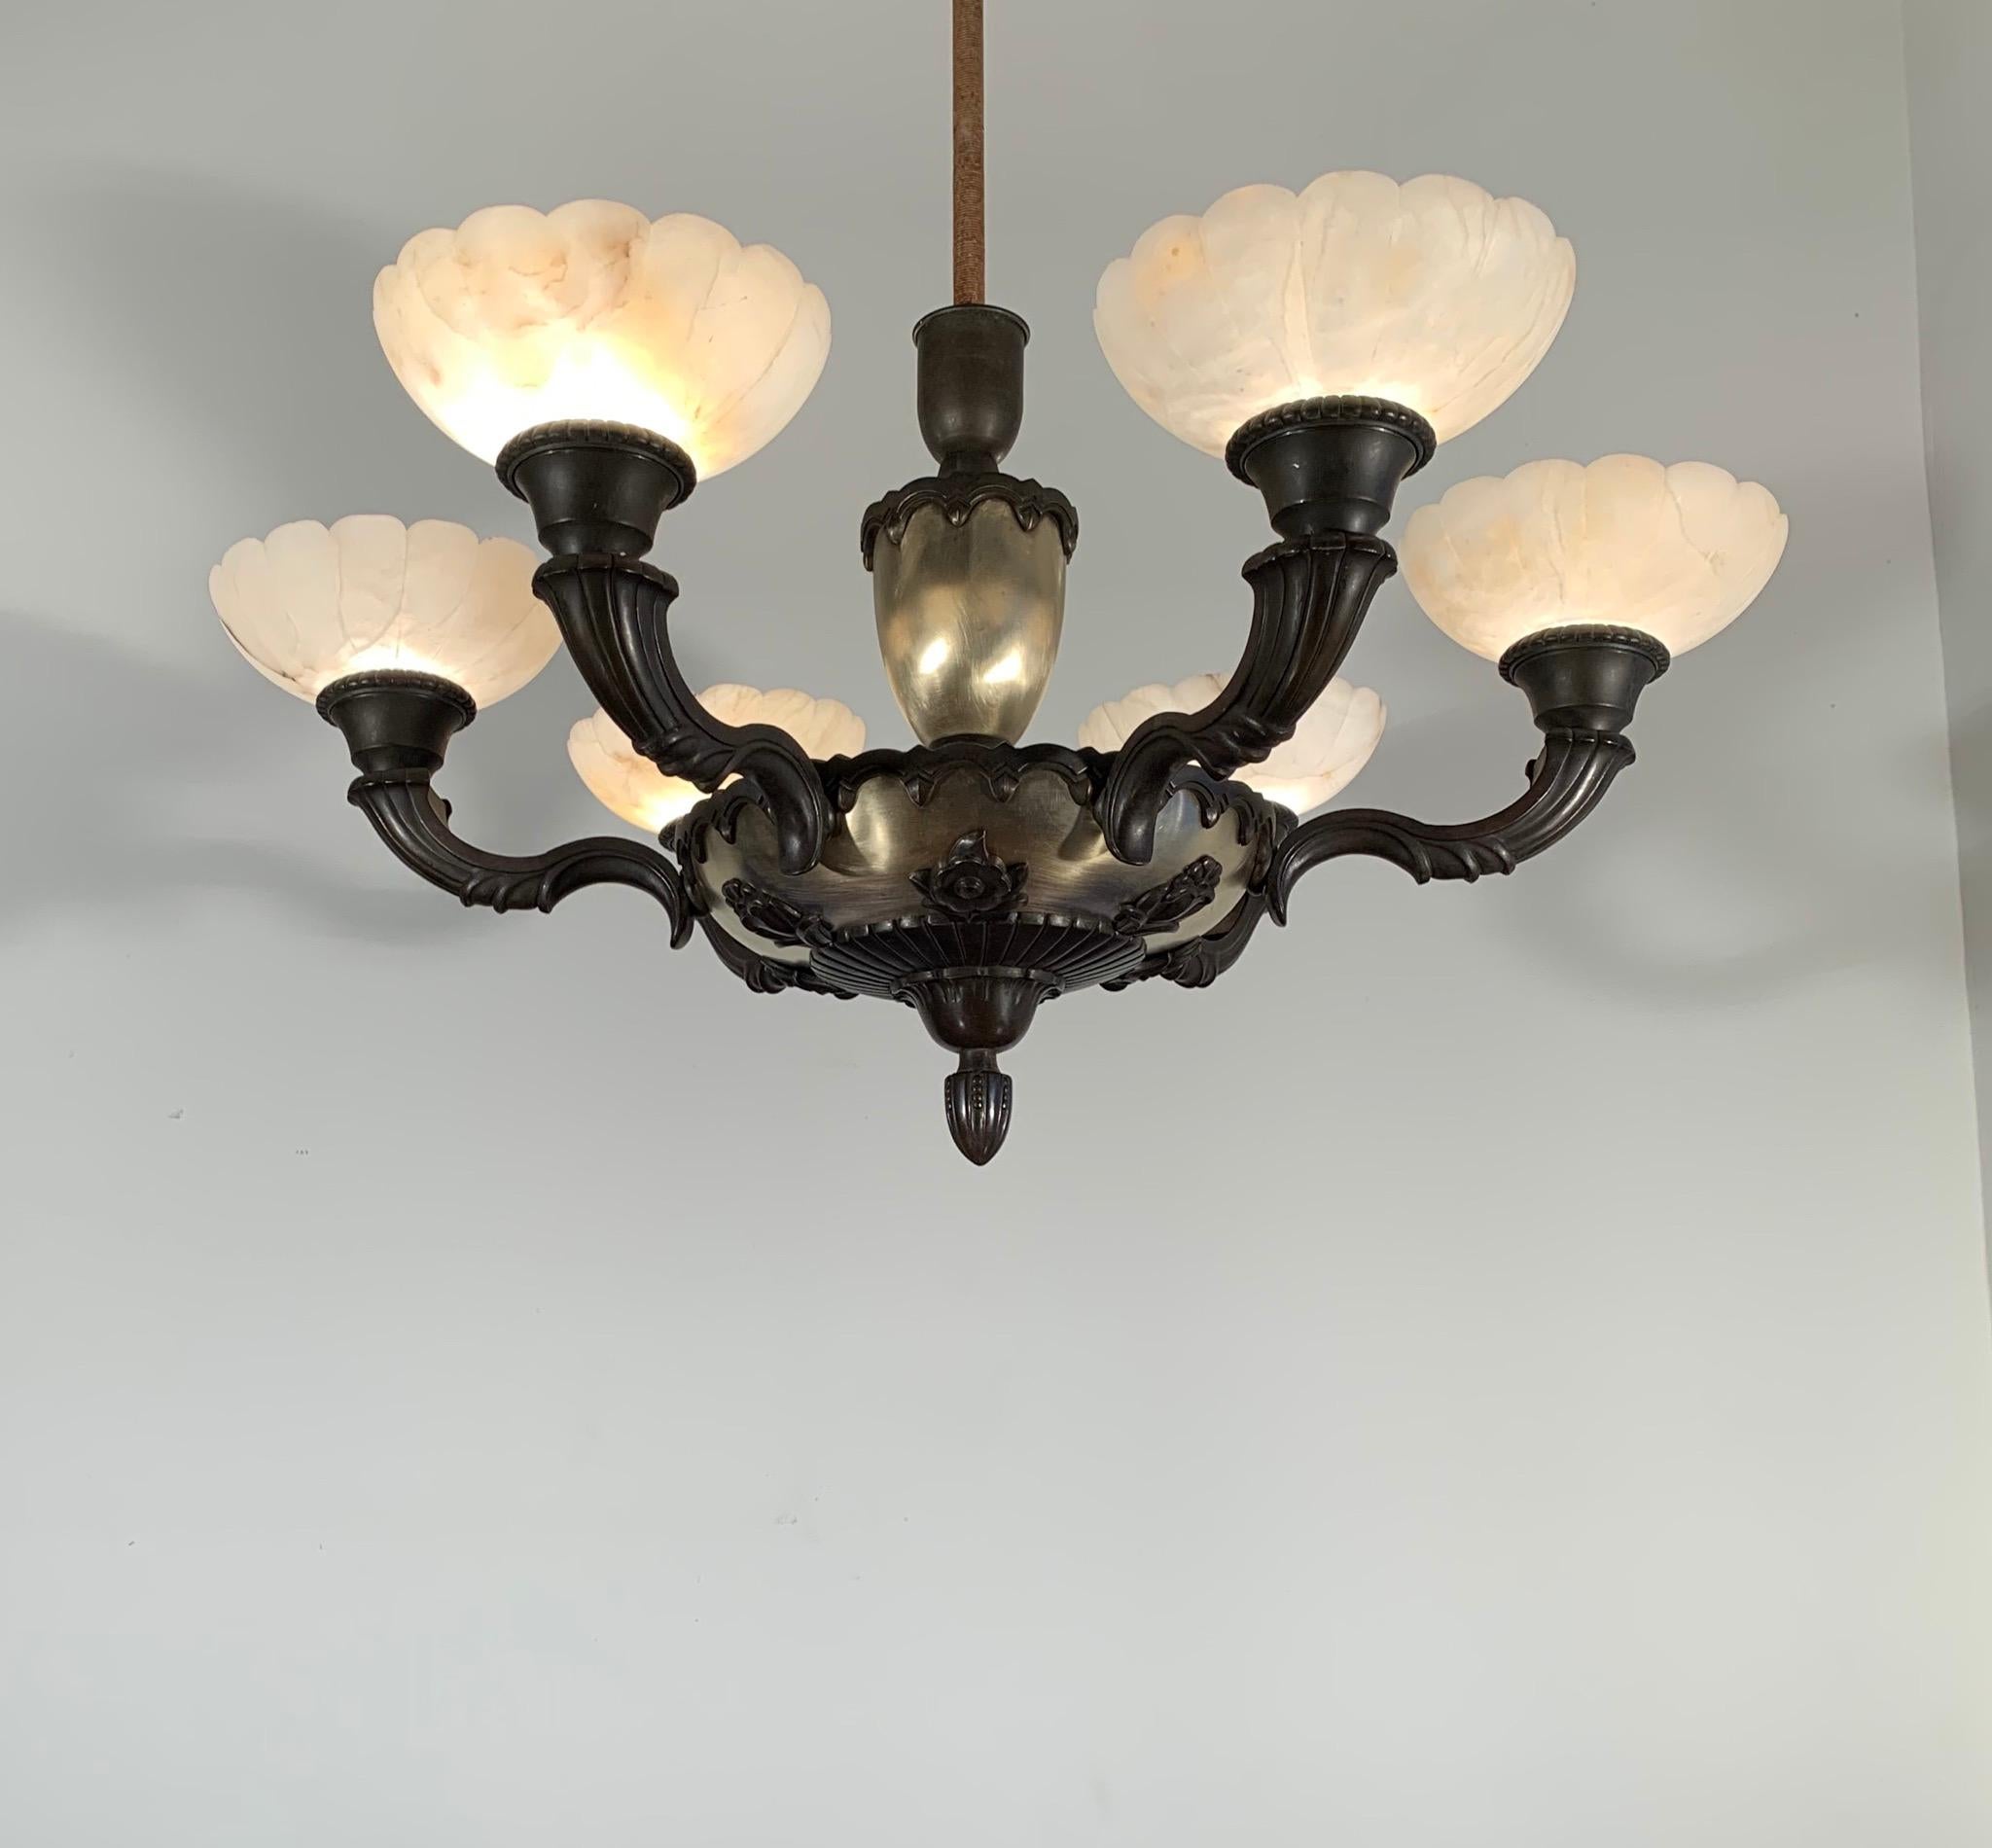 20th Century Stylish 1920s Art Deco White Alabaster and Bronze Arms Chandelier Light Fixture